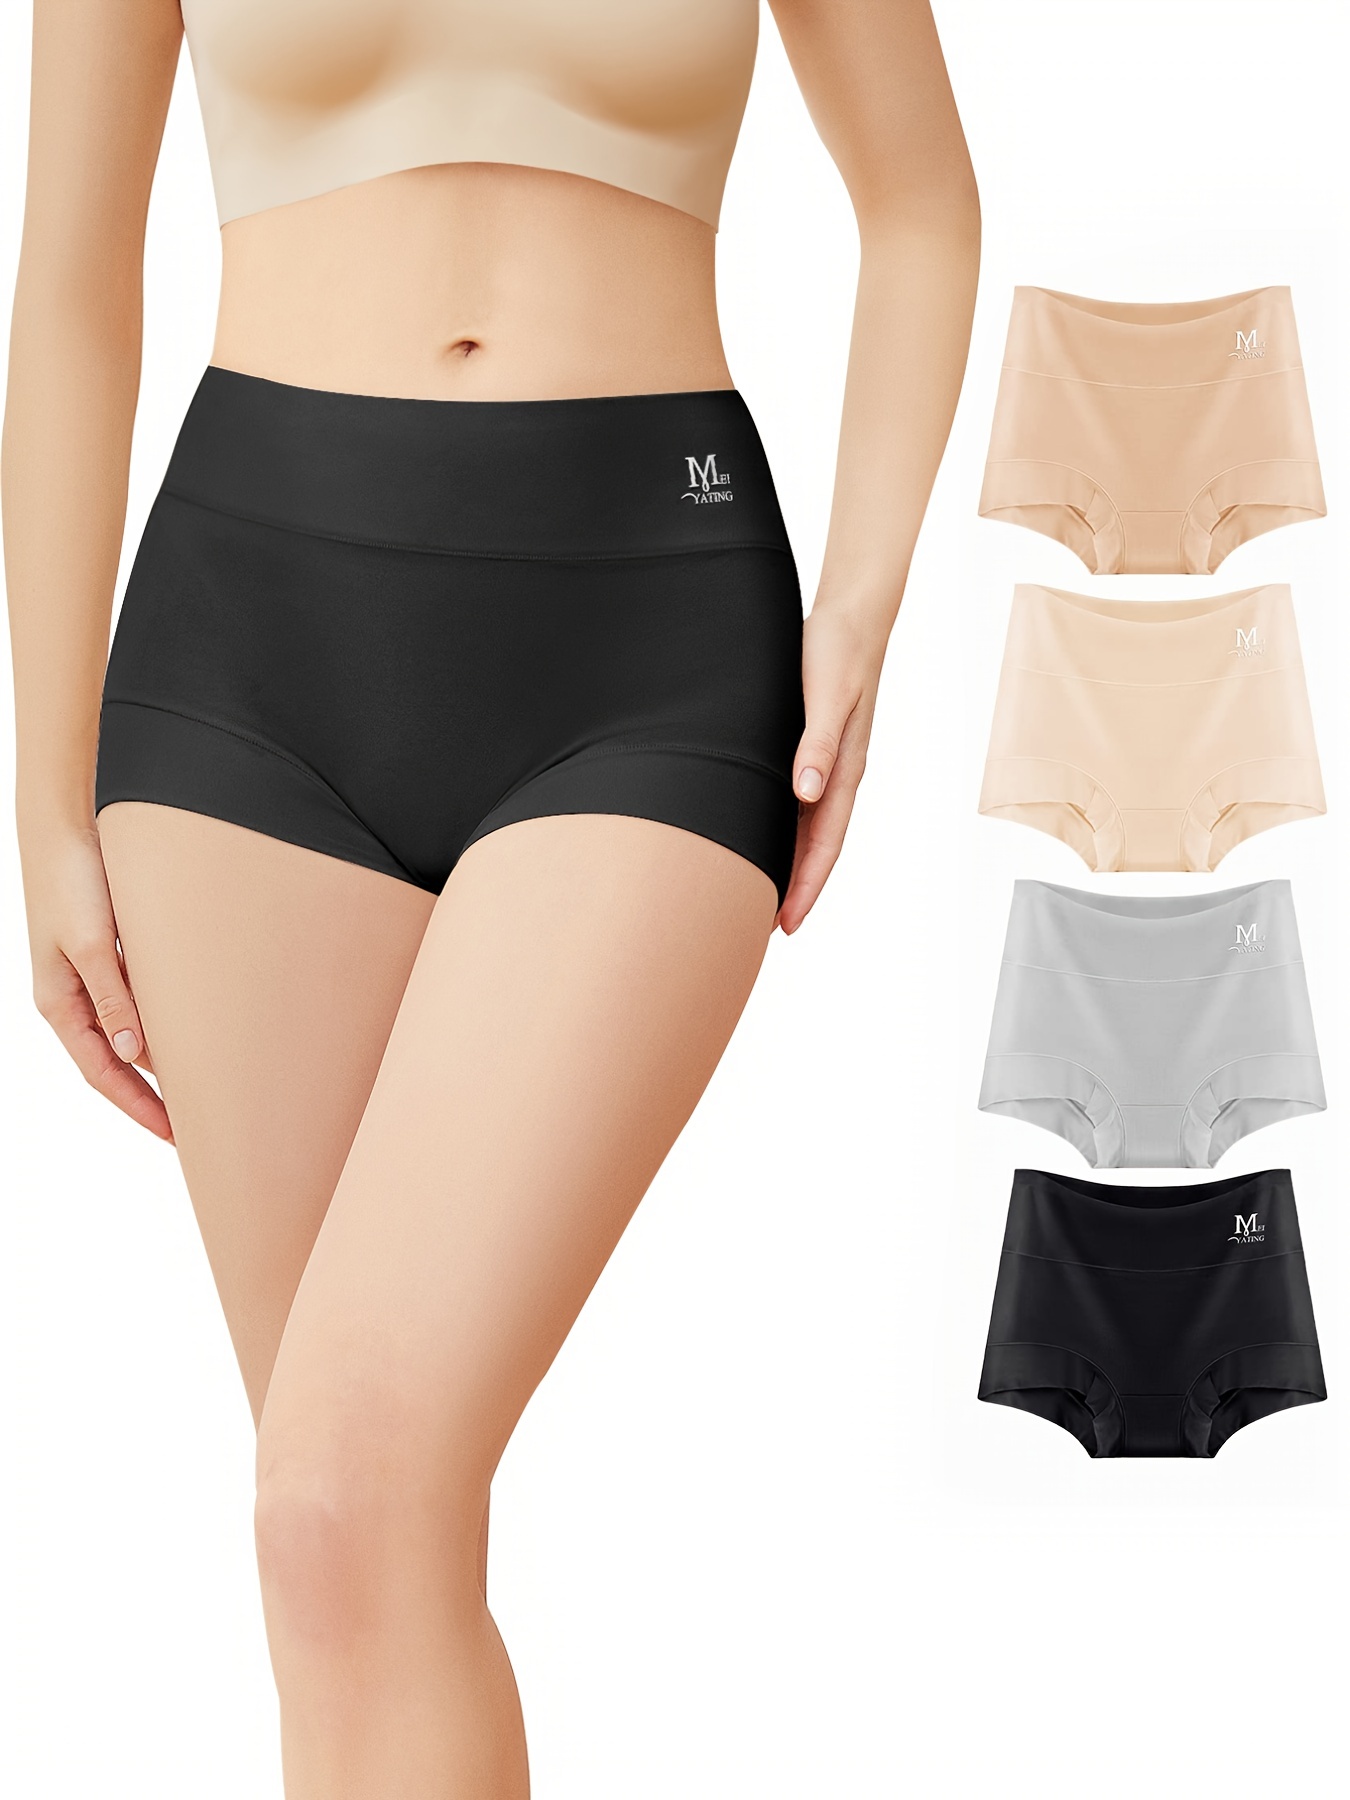 pack of 3(any 3 colors) boyshort panties for women/Sorty/Solid Hipster  Inner Wear Panty/ High Rise Full Brief Cotton Stretch Full Coverage Panty/ ladies, women,girls underwear/sorty/knickers/boyshorts panties/boy shorts  panties/briefs/panties for girls